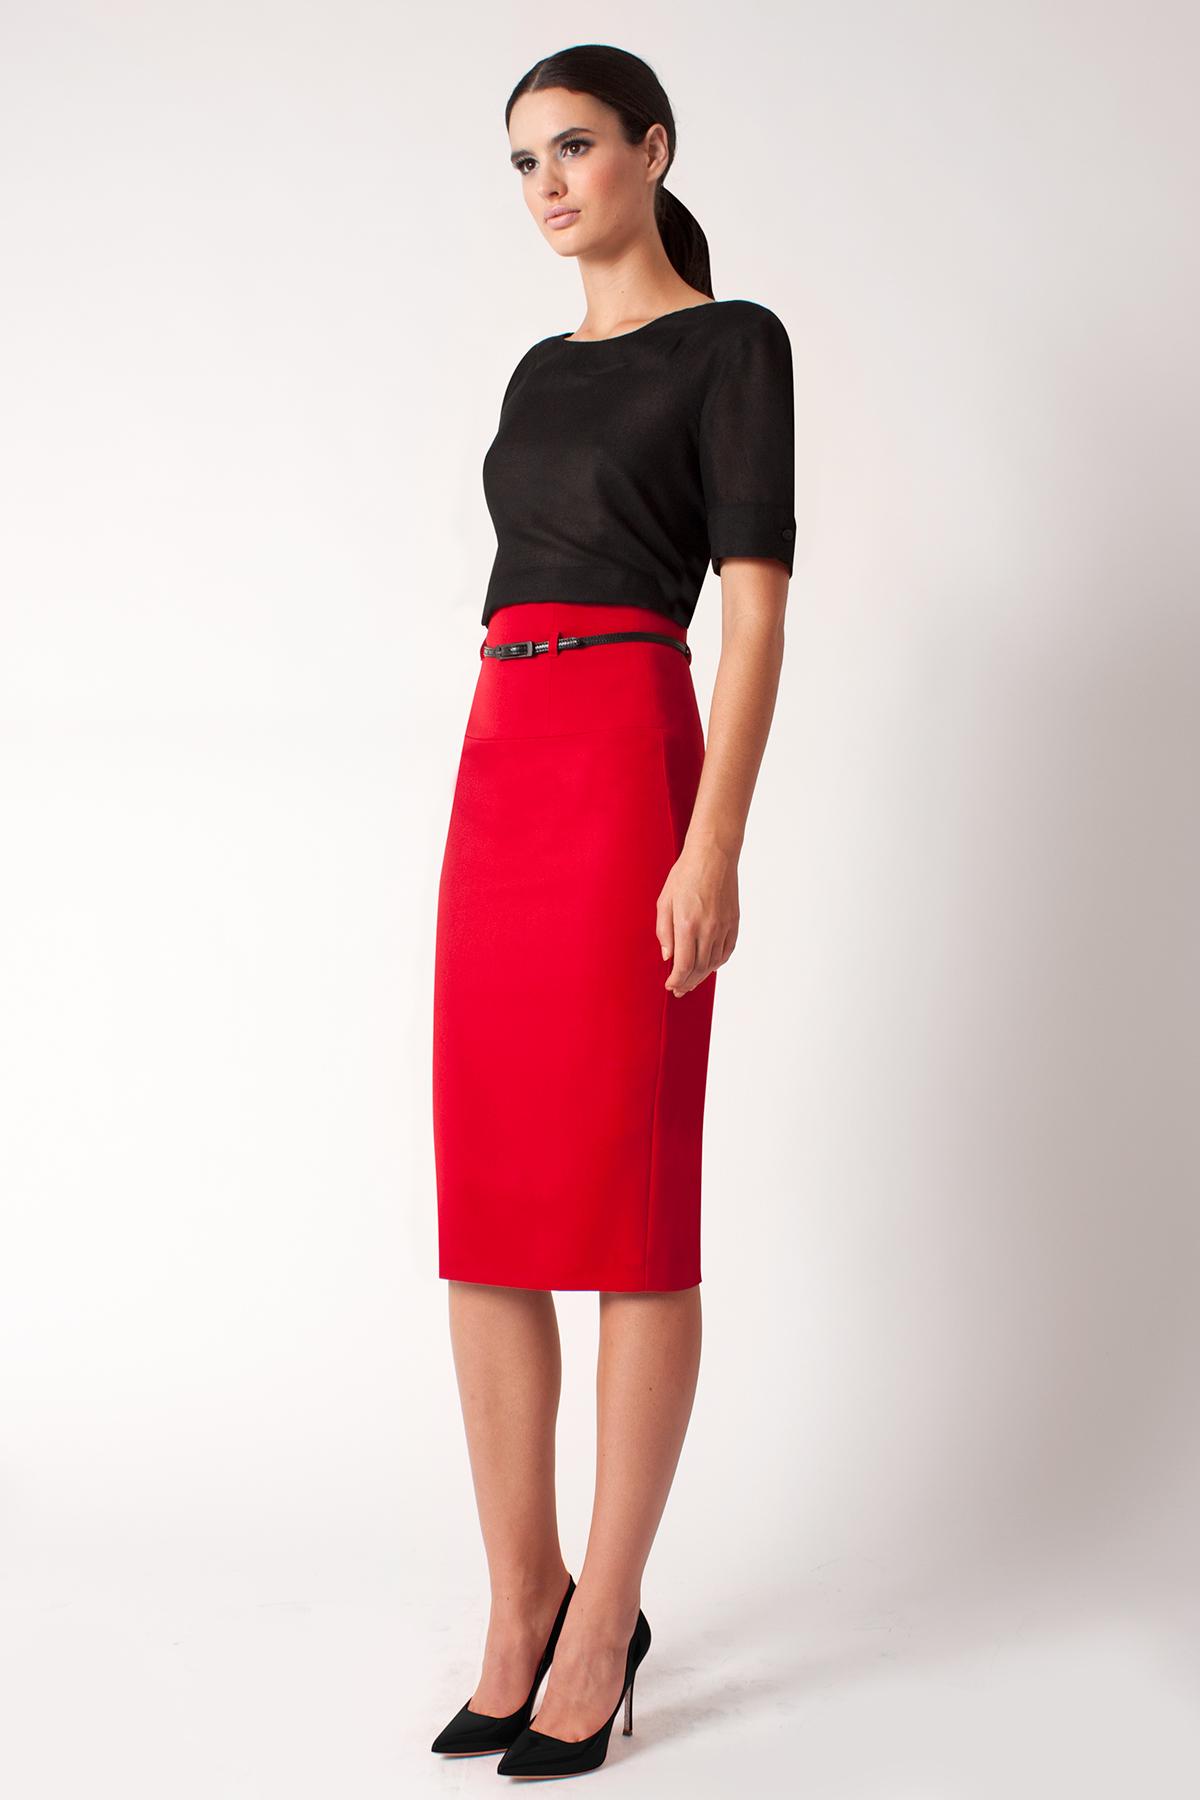 Lyst - Black Halo High Waist Pencil Skirt *online Exclusive* in Red